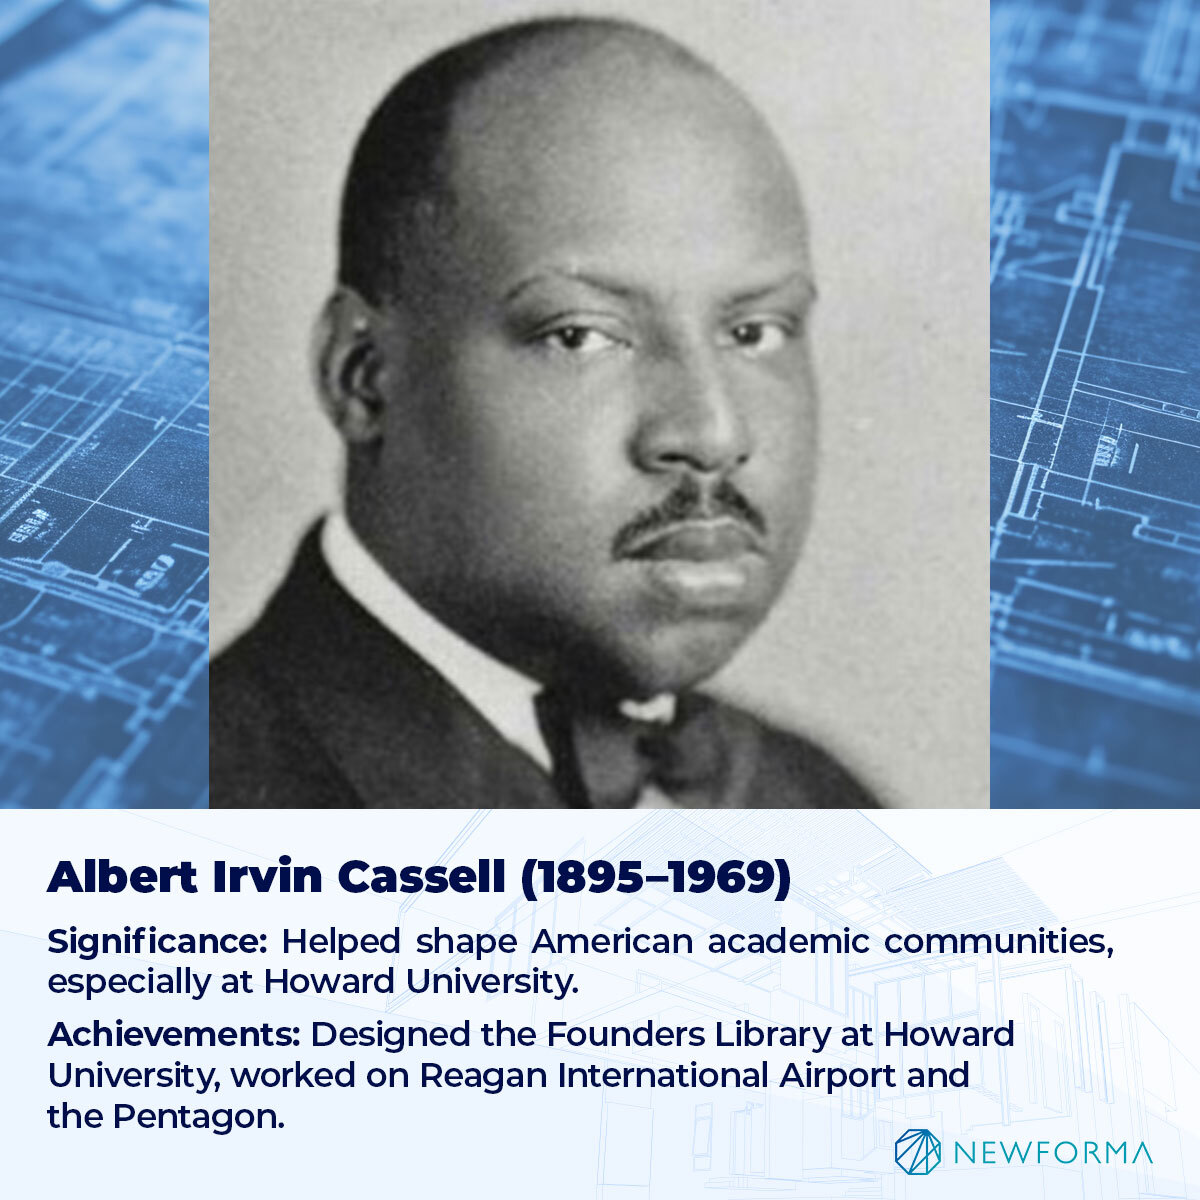 SIGNIFICANCE: HELPED SHAPE AMERICAN ACADEMIC COMMUNITIES, ESPECIALLY AT HOWARD UNIVERSITY. 
ACHIEVEMENTS: DESIGNED THE FOUNDERS LIBRARY AT HOWARD UNIVERSITY, WORKED ON REAGAN INTERNATIONAL AIRPORT AND THE PENTAGON. 
